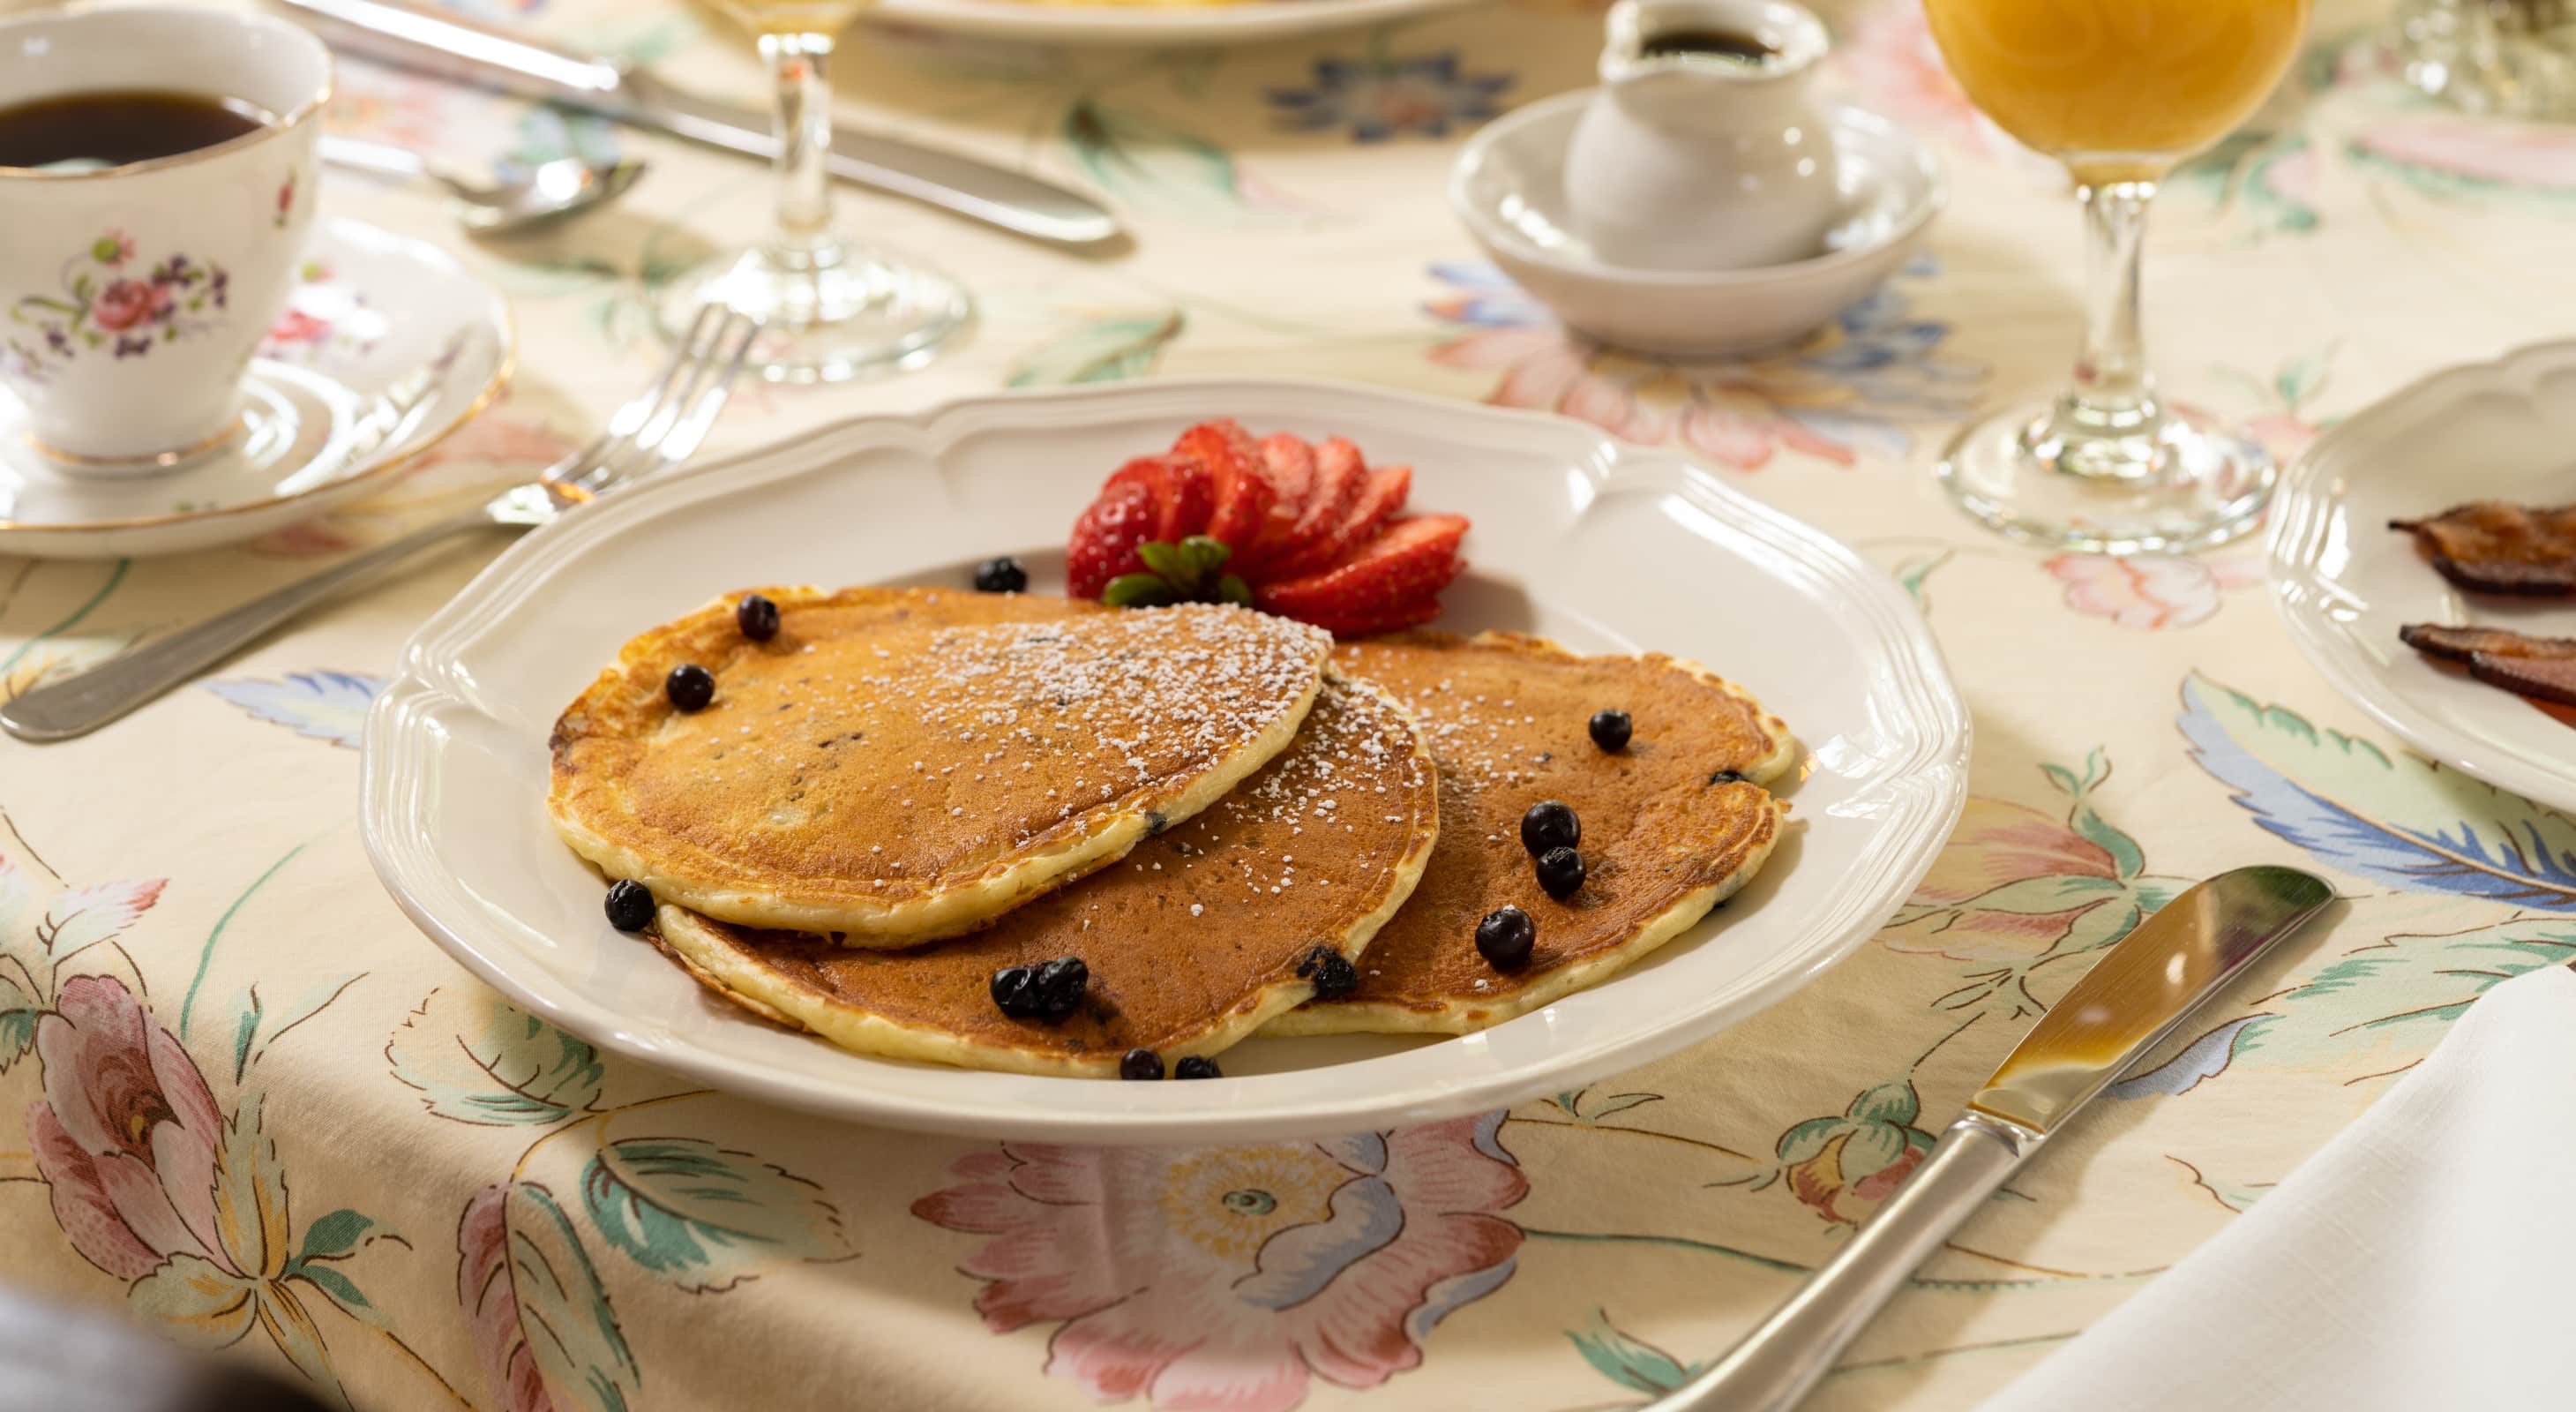 blueberry pancakes served with fresh cut strawberries